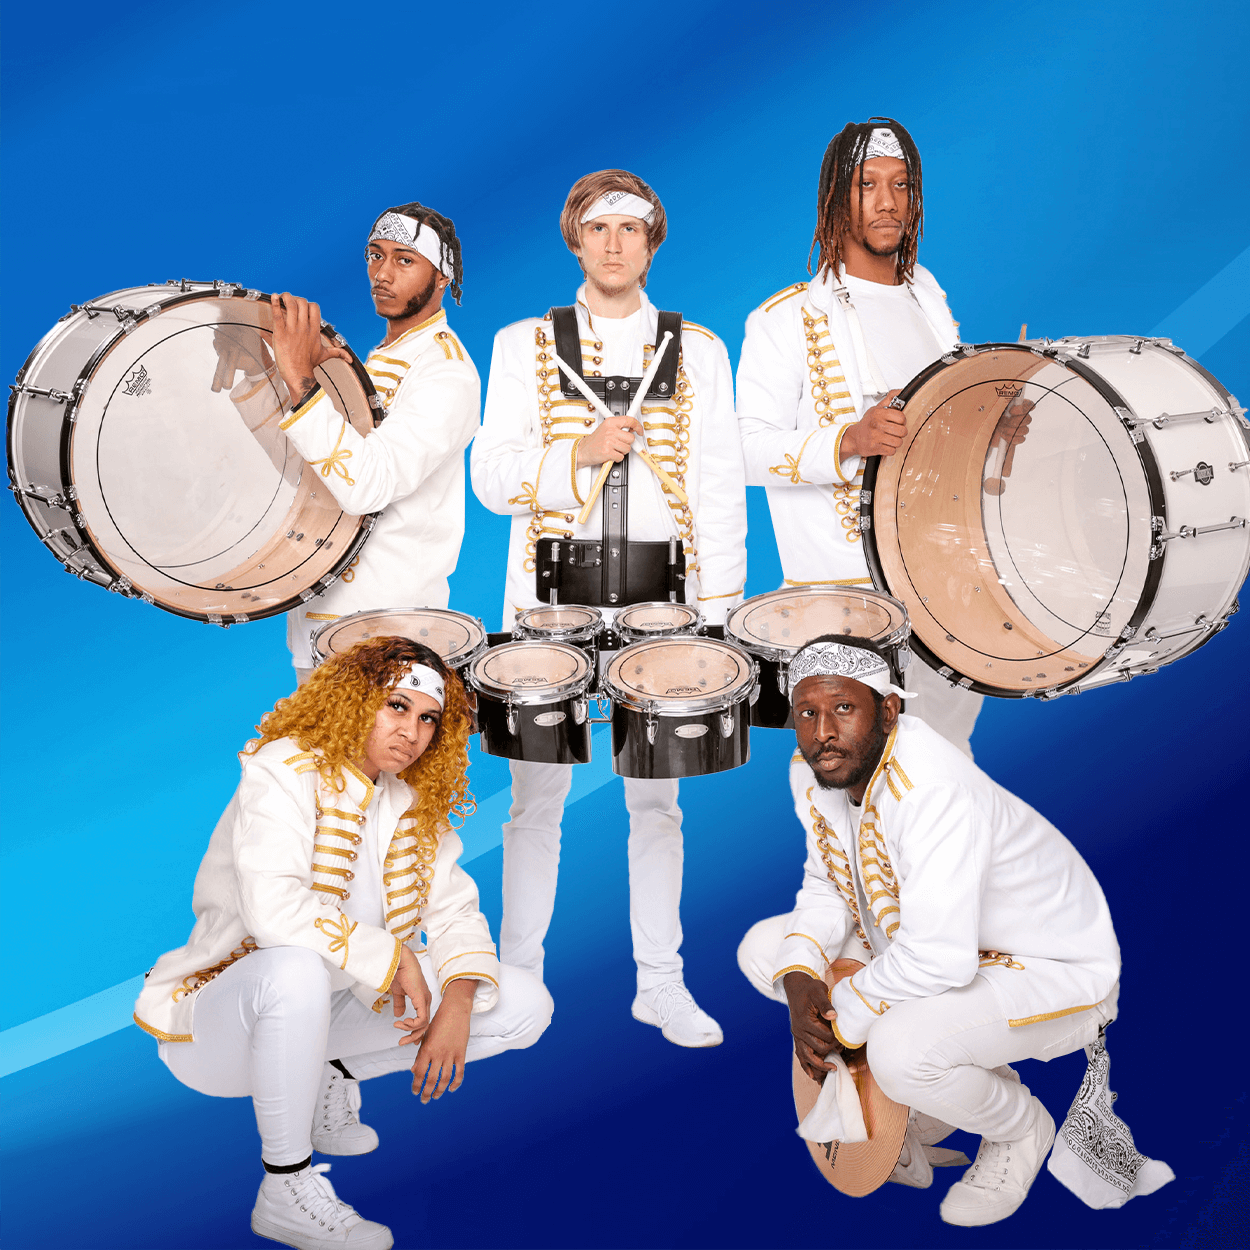 THE PACK DRUMLINE America's Got Talent contestant